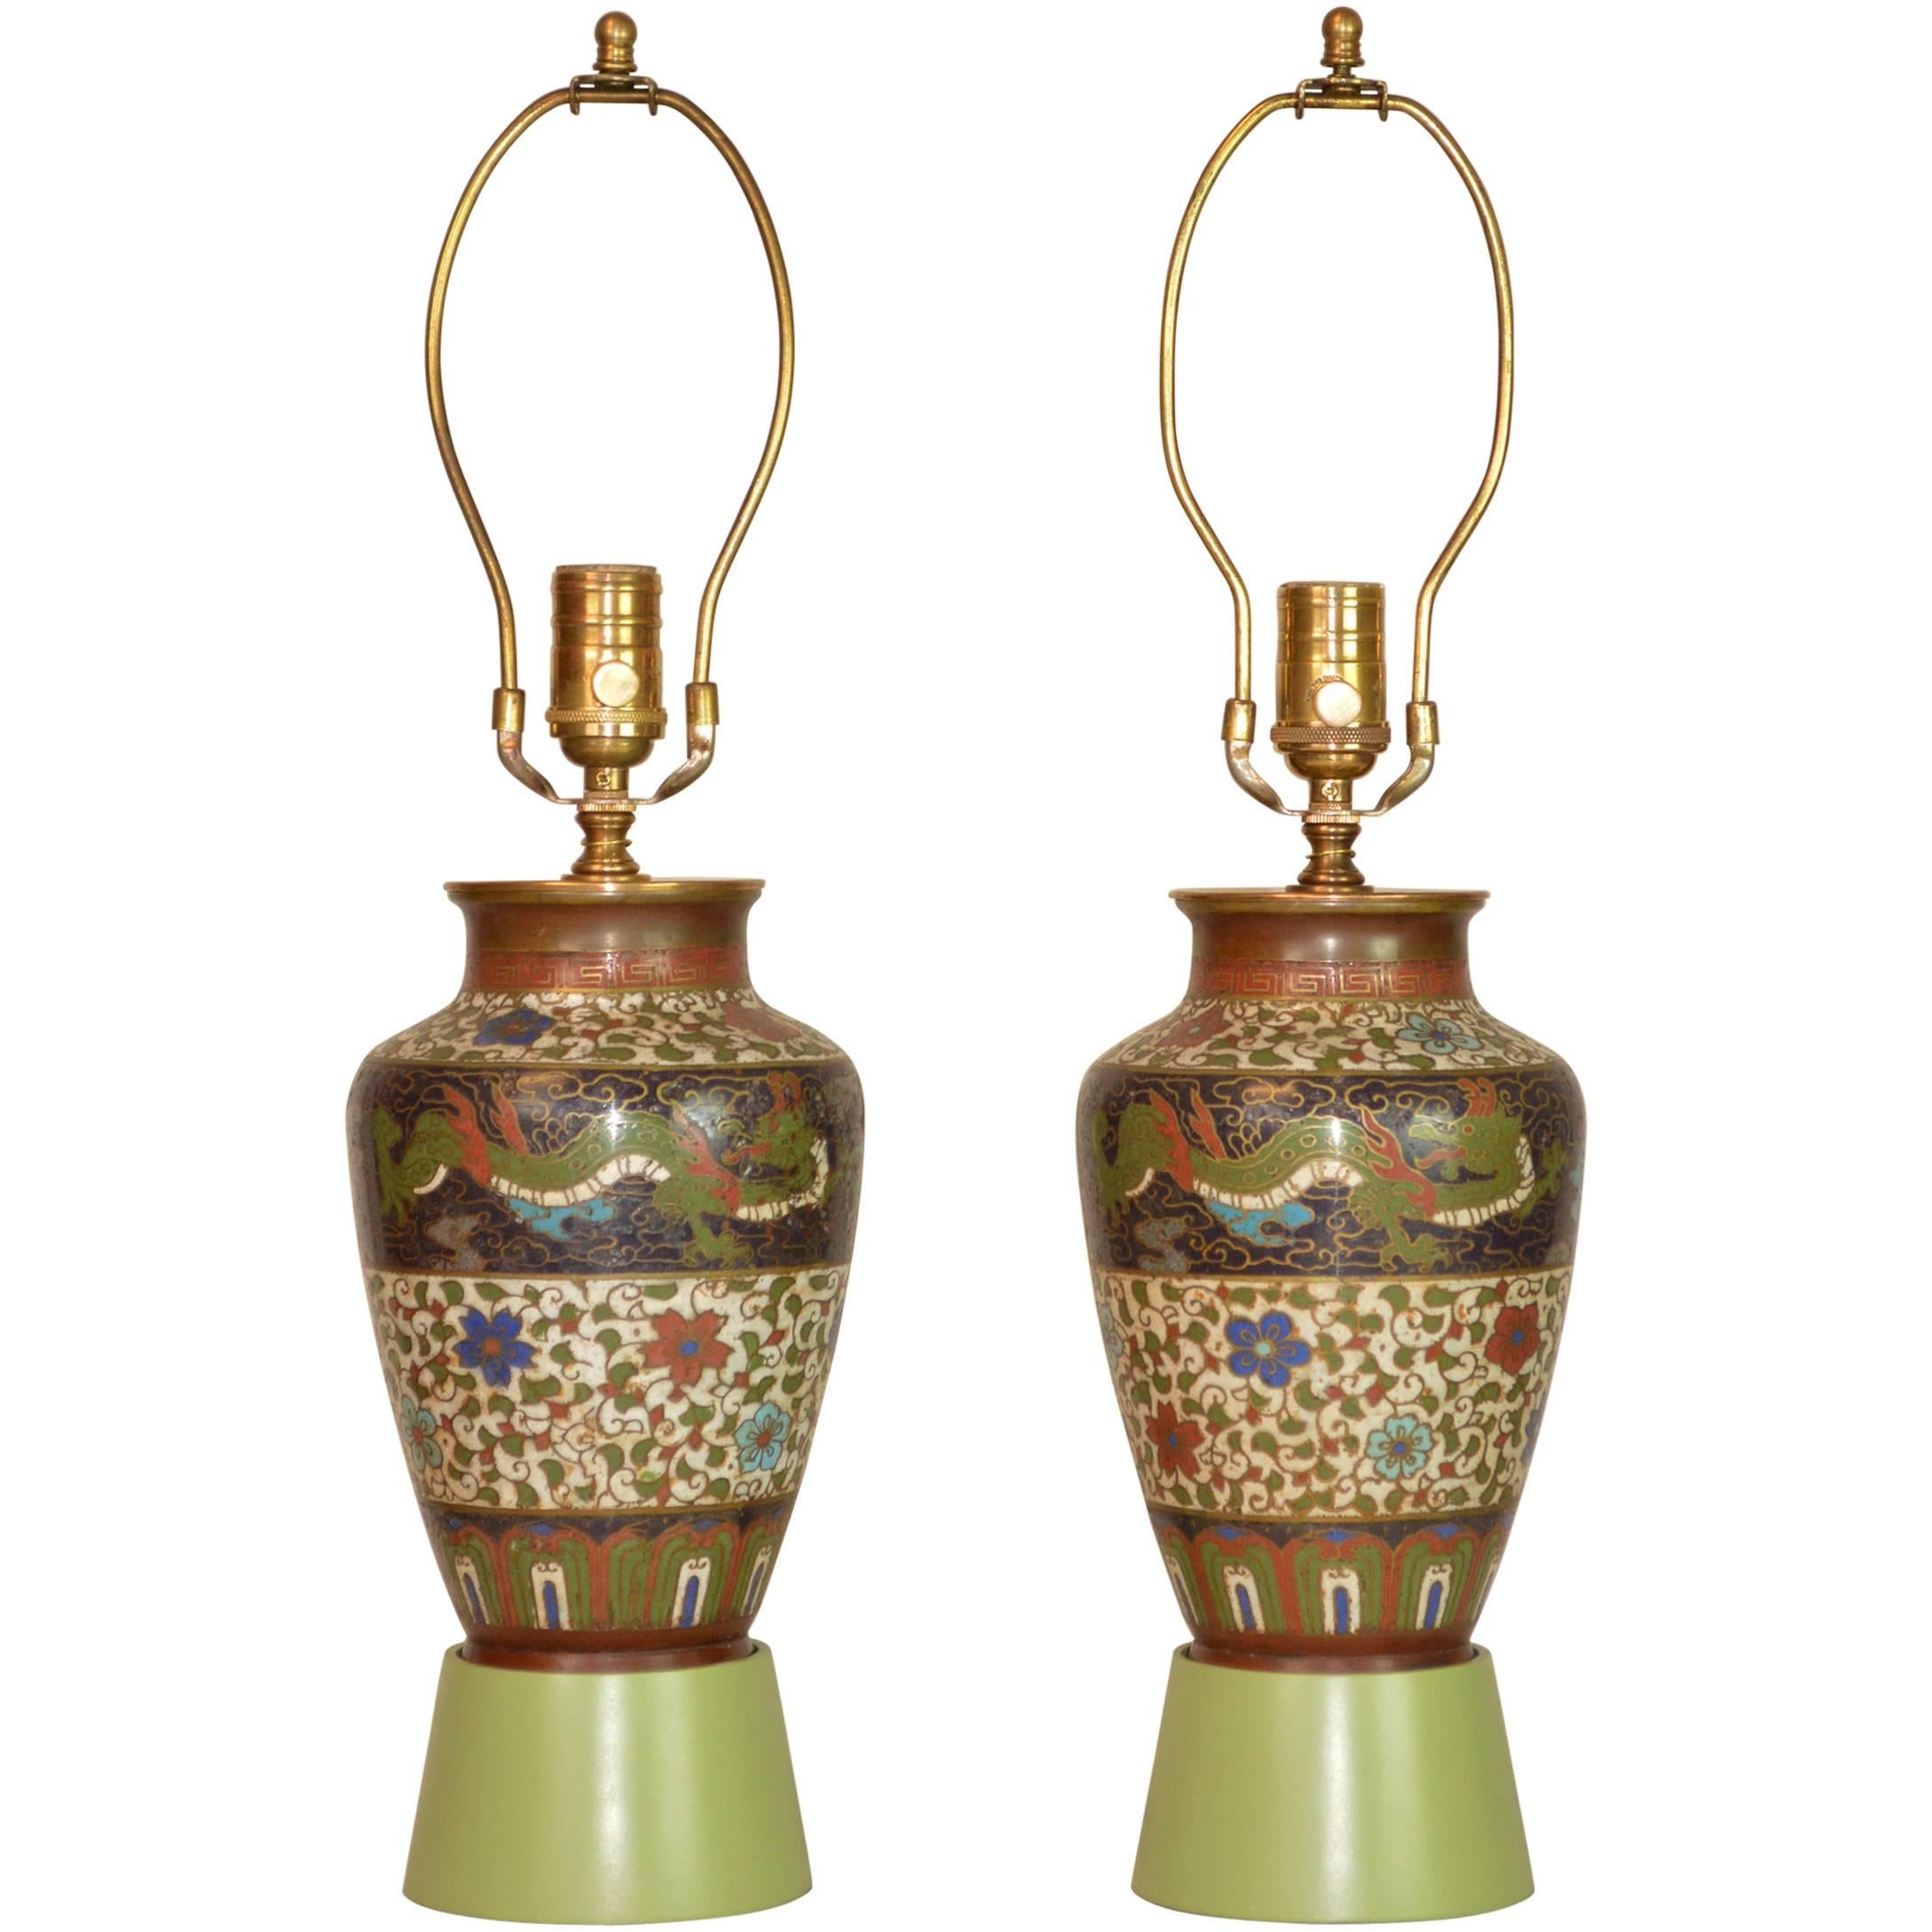 Rare Pair of Cloisonné Vases Mounted as Lamps